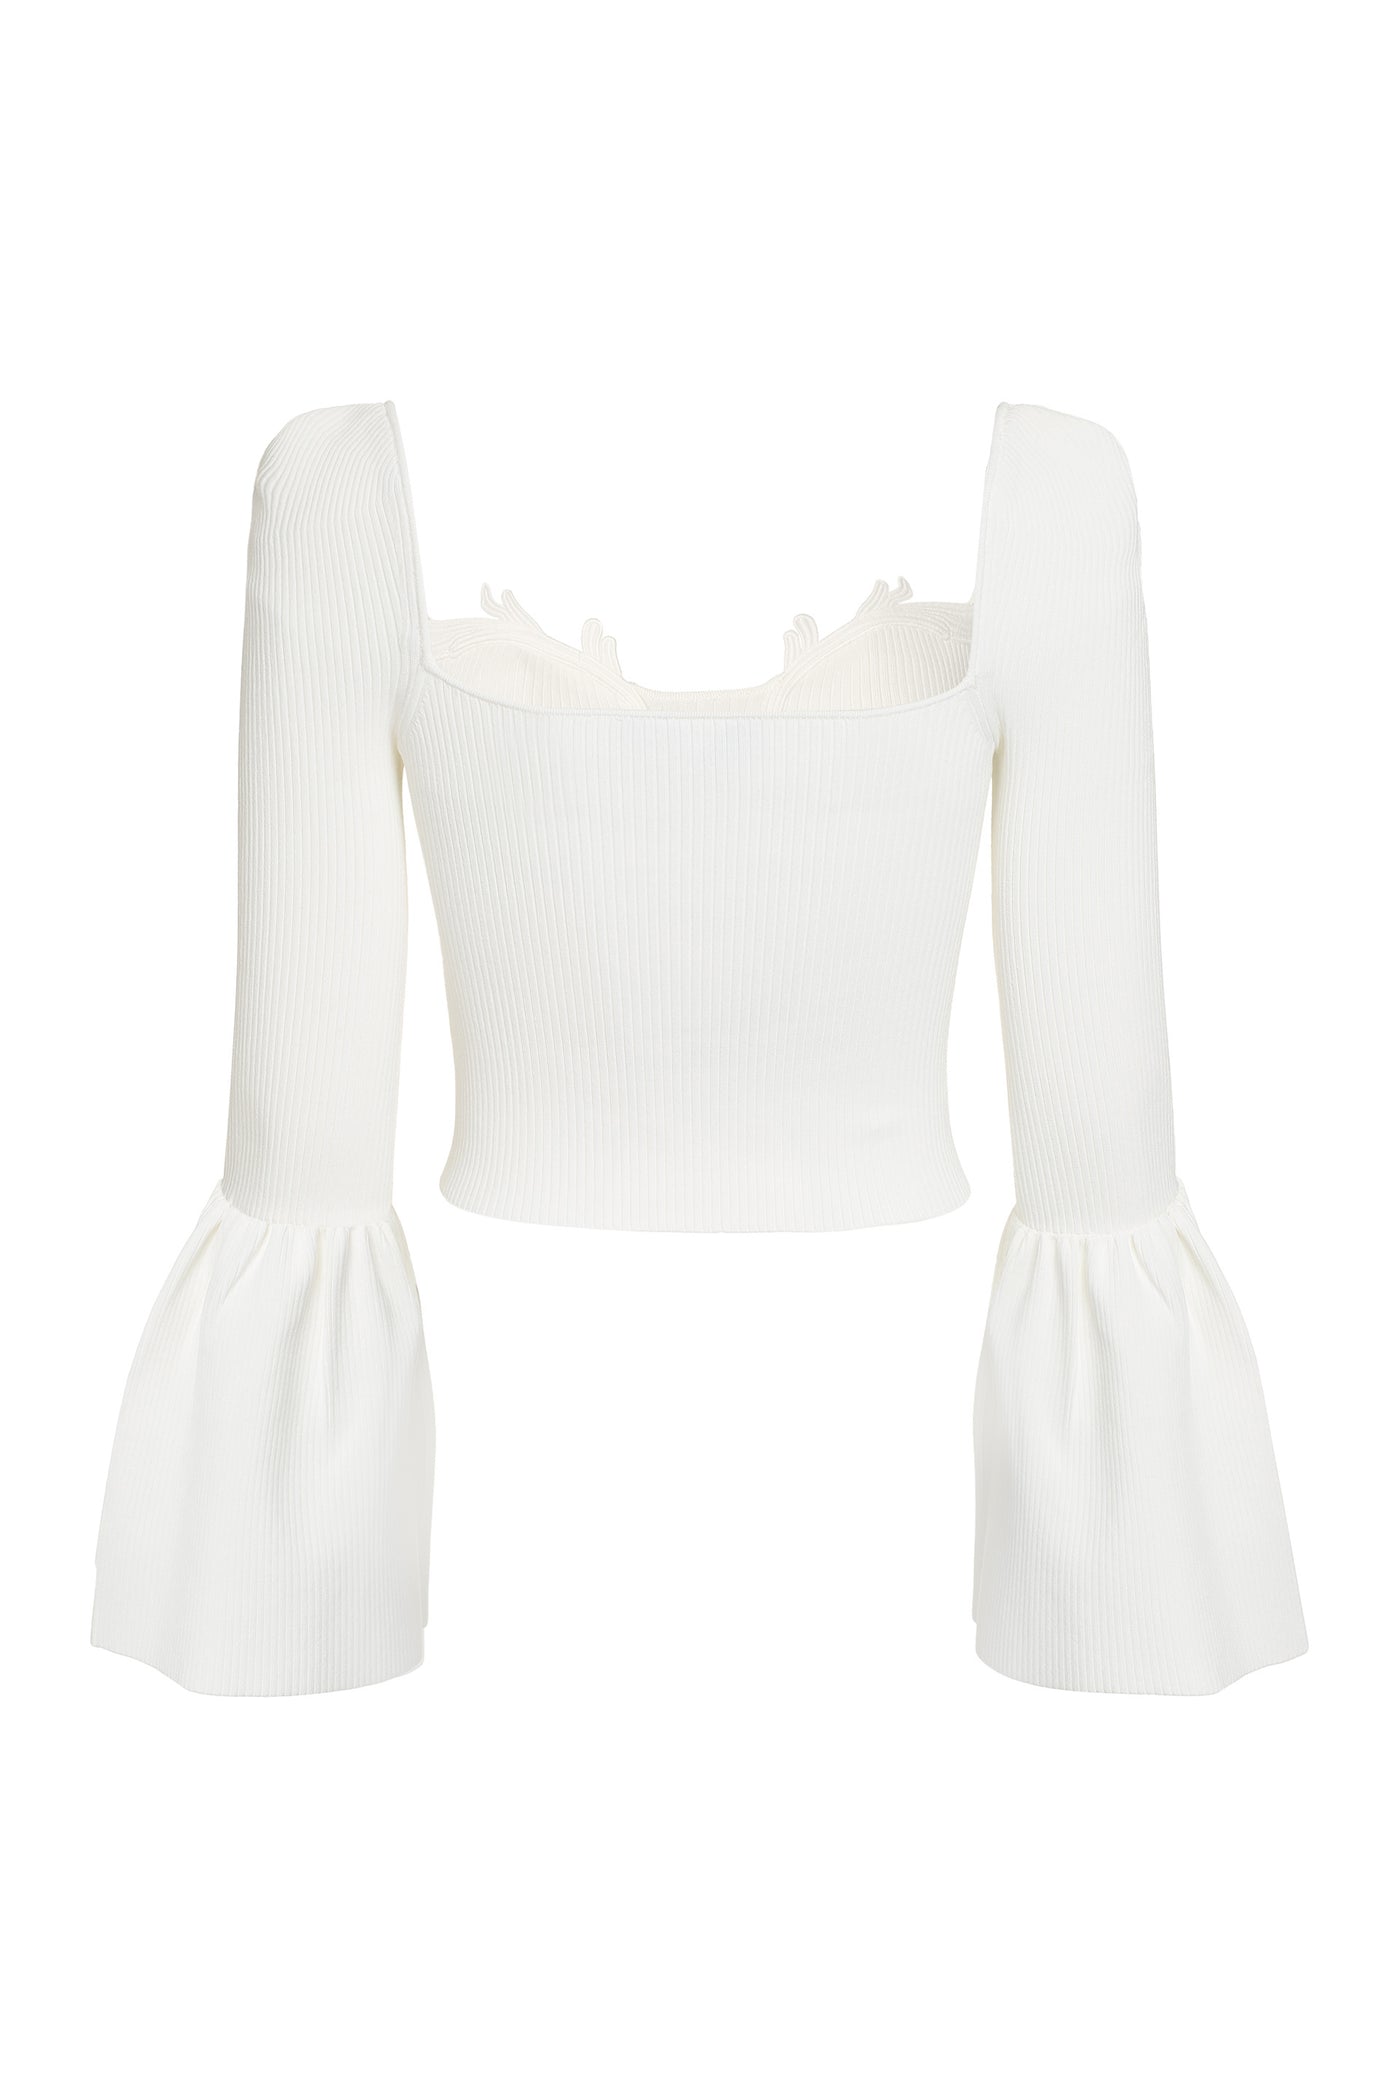 WHITE SELF-PORTRAIT RIBBED KNIT CROP TOP